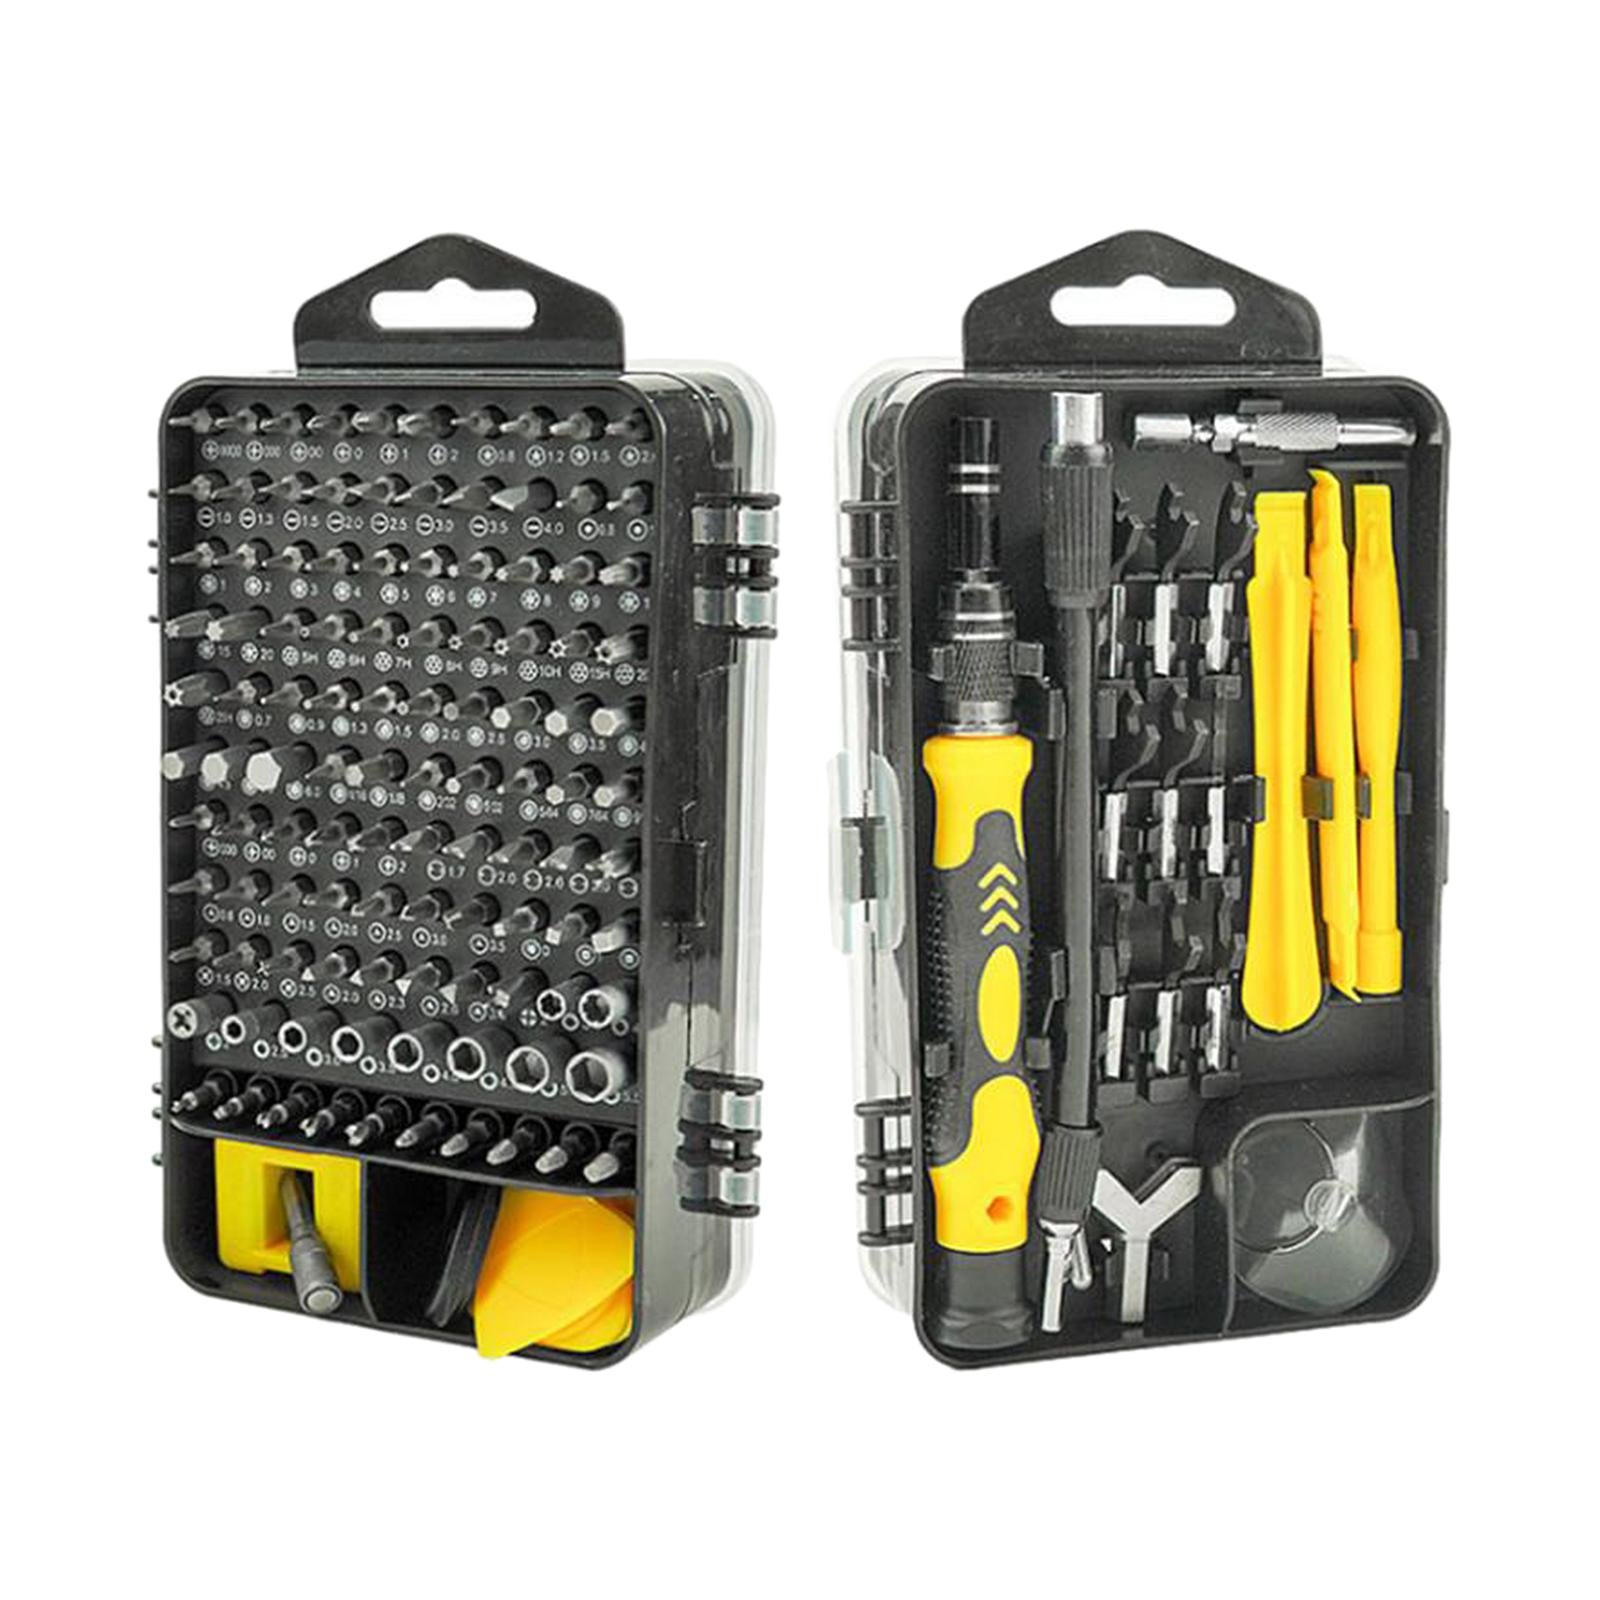 138 in 1 Screwdriver Kit Repair Tool Kits with Case for Cellphone DIY Laptop Yellow